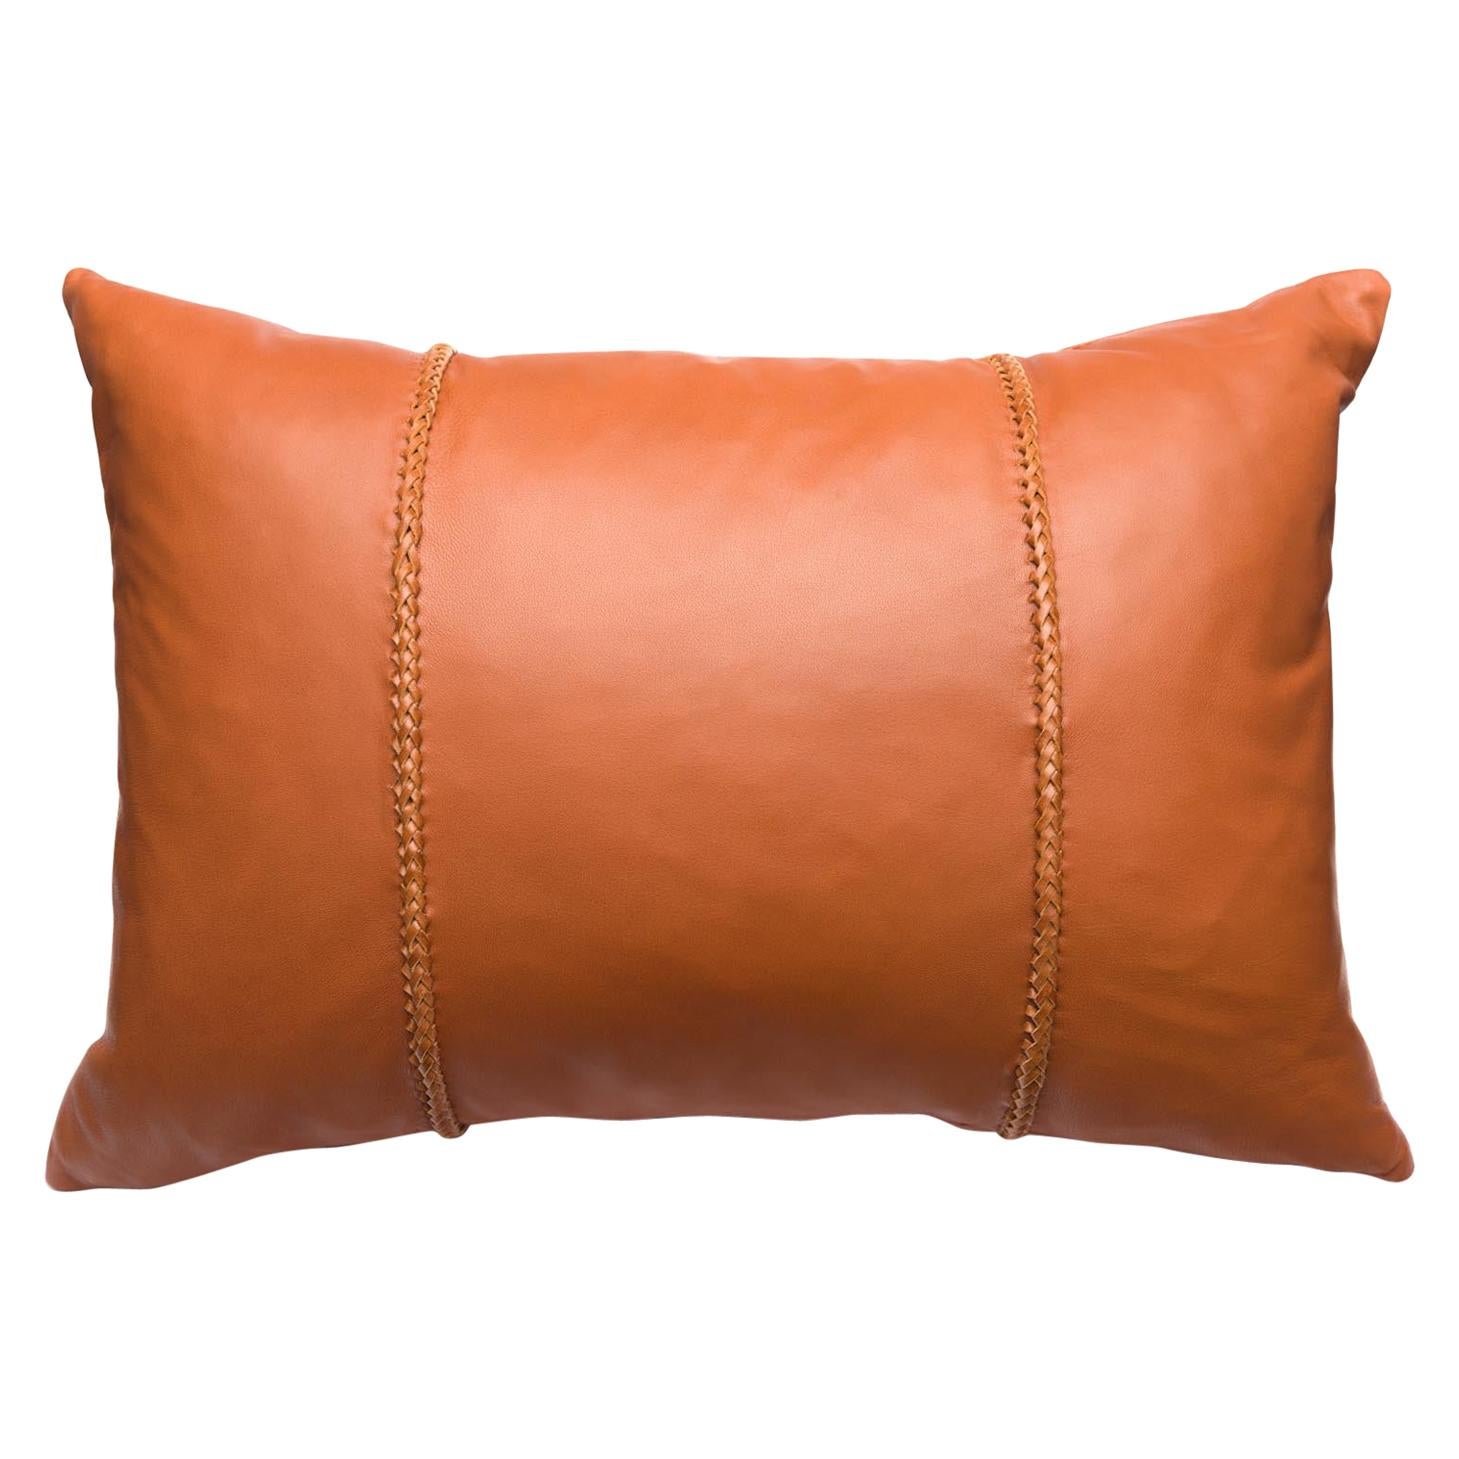 Cognac Brown Leather Pillow with Leather Cross Stitch Lumbar Cushion For Sale